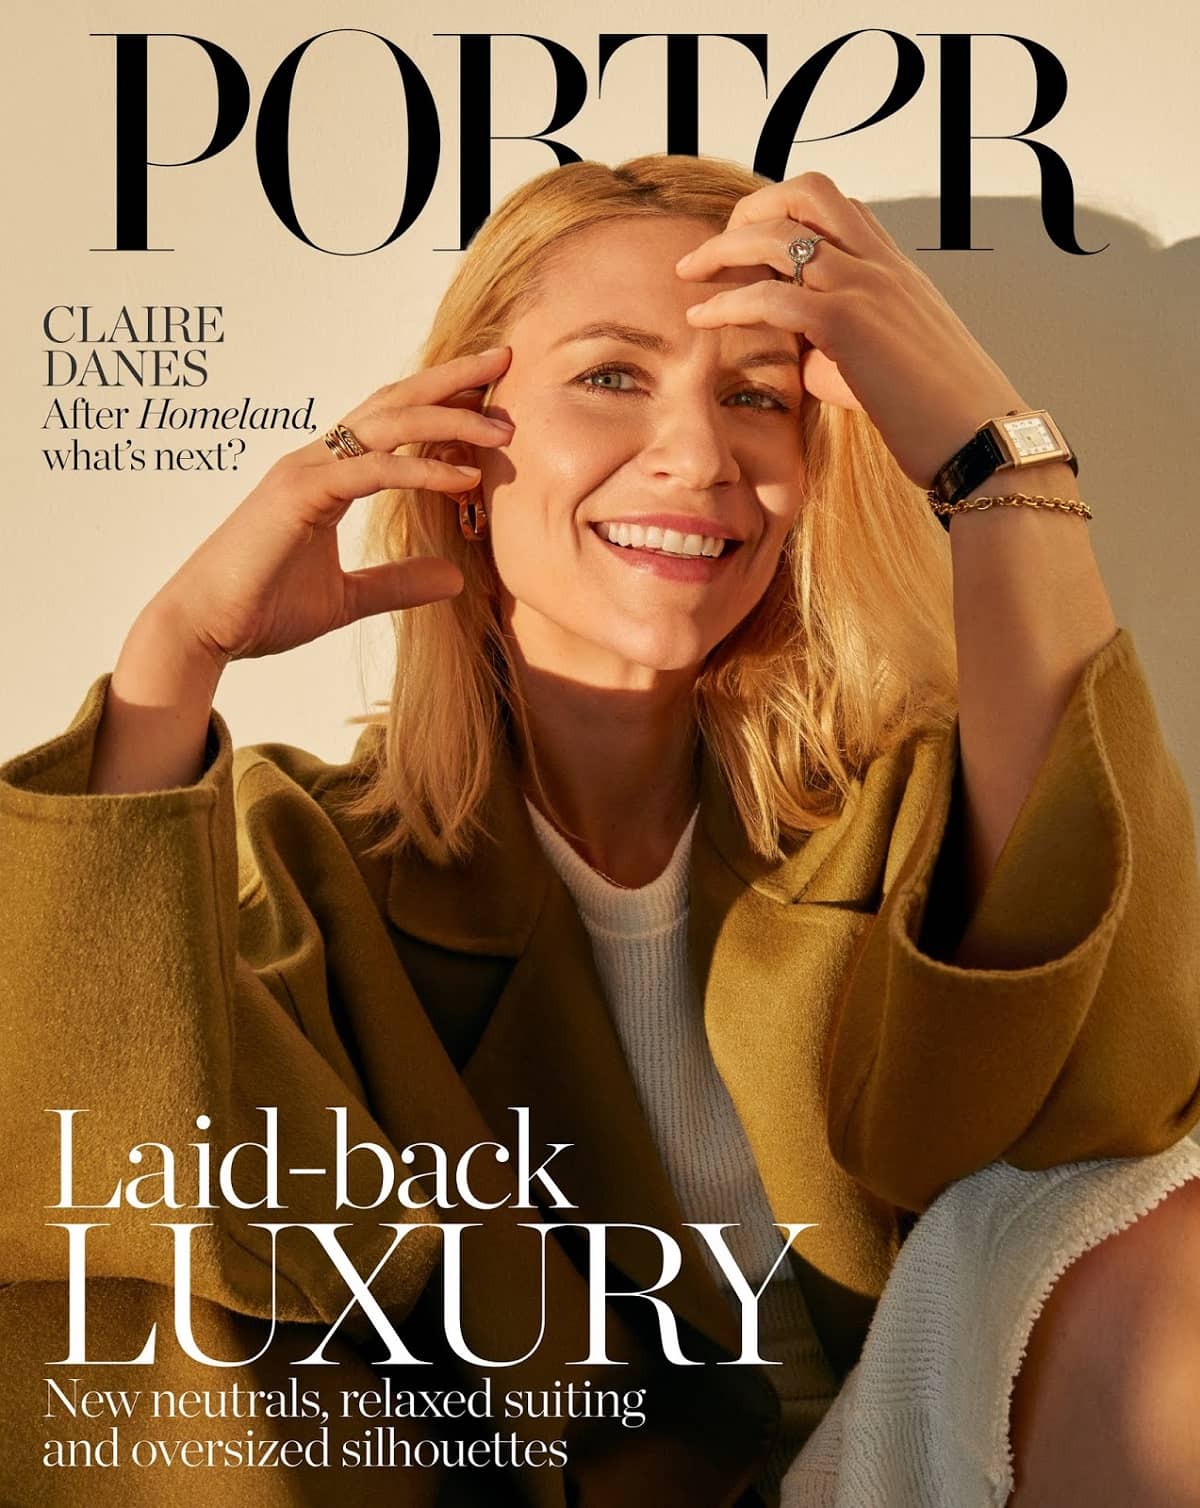 Claire Danes Covers Porter Edit Magazine February 2020 Clothing & Accessories: Coat by Loewe; dress by Jil Sander; necklace and bracelet by Loren Stewart; watch by Jaeger-LeCoultre; rings by Sarah & Sebastian, Stvdio; earrings by Anita Ko